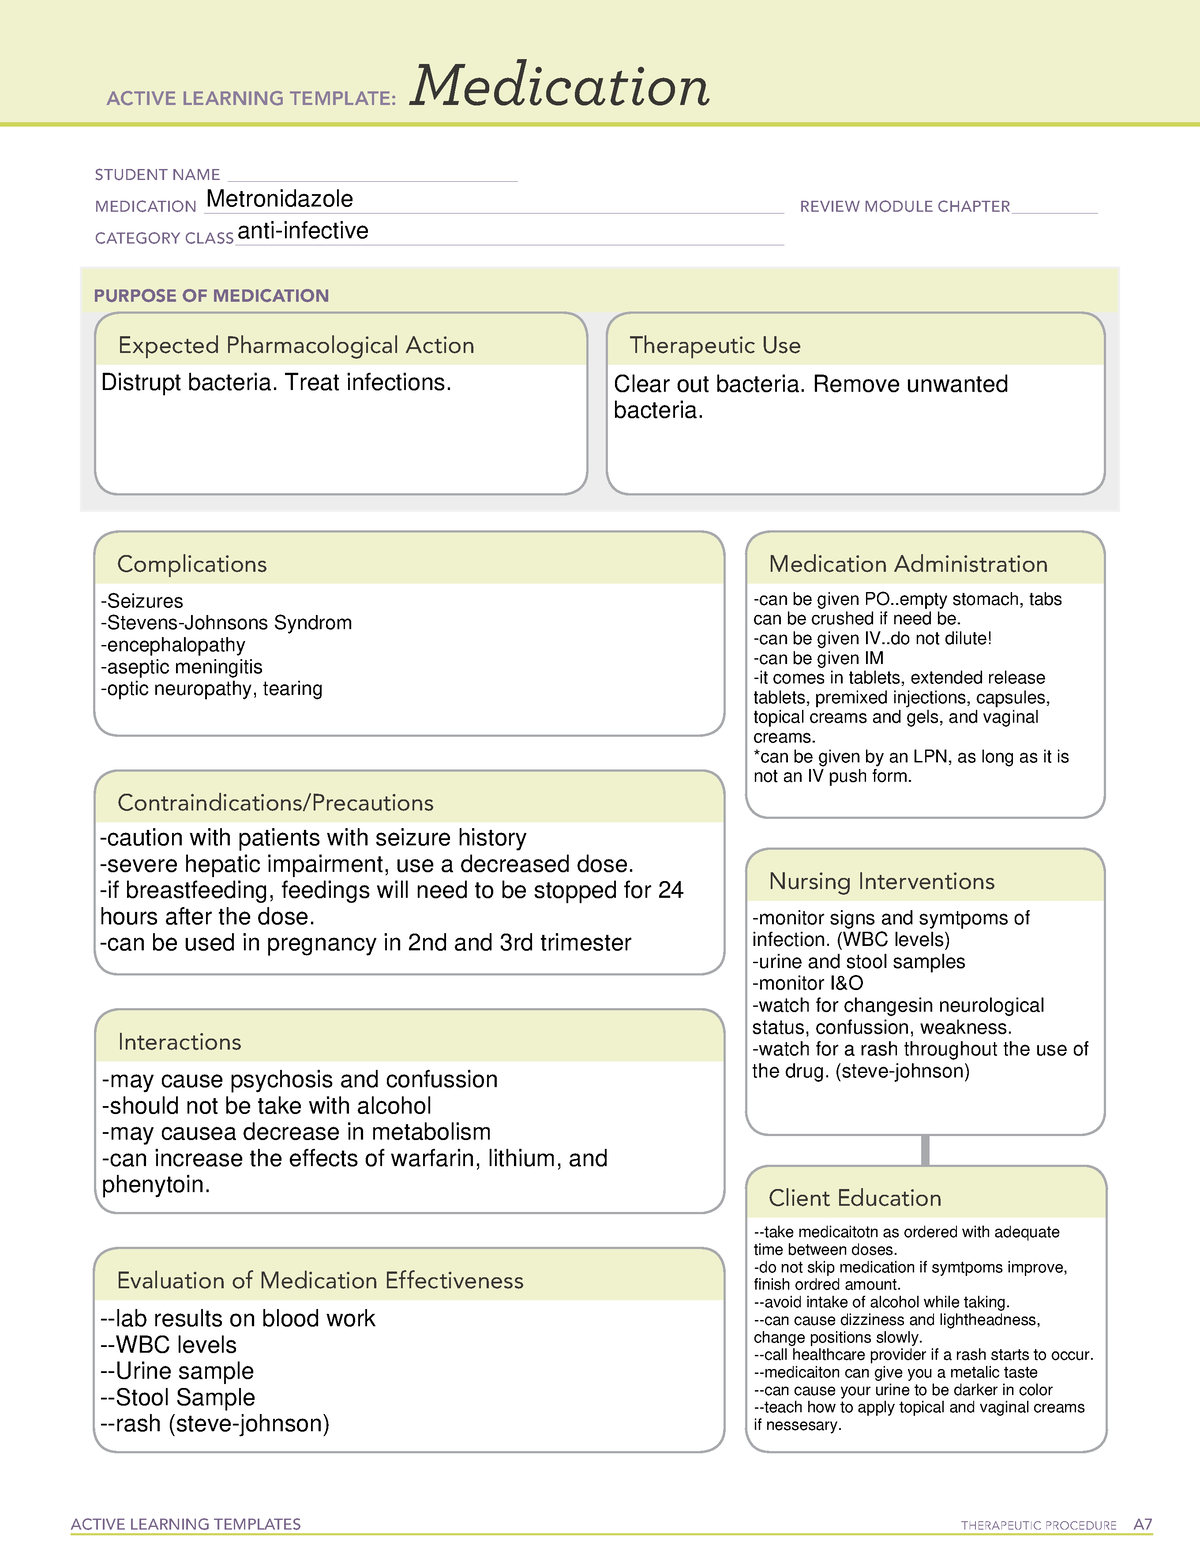 active-learning-template-h-agonist-active-learning-templates-therapeutic-procedure-a